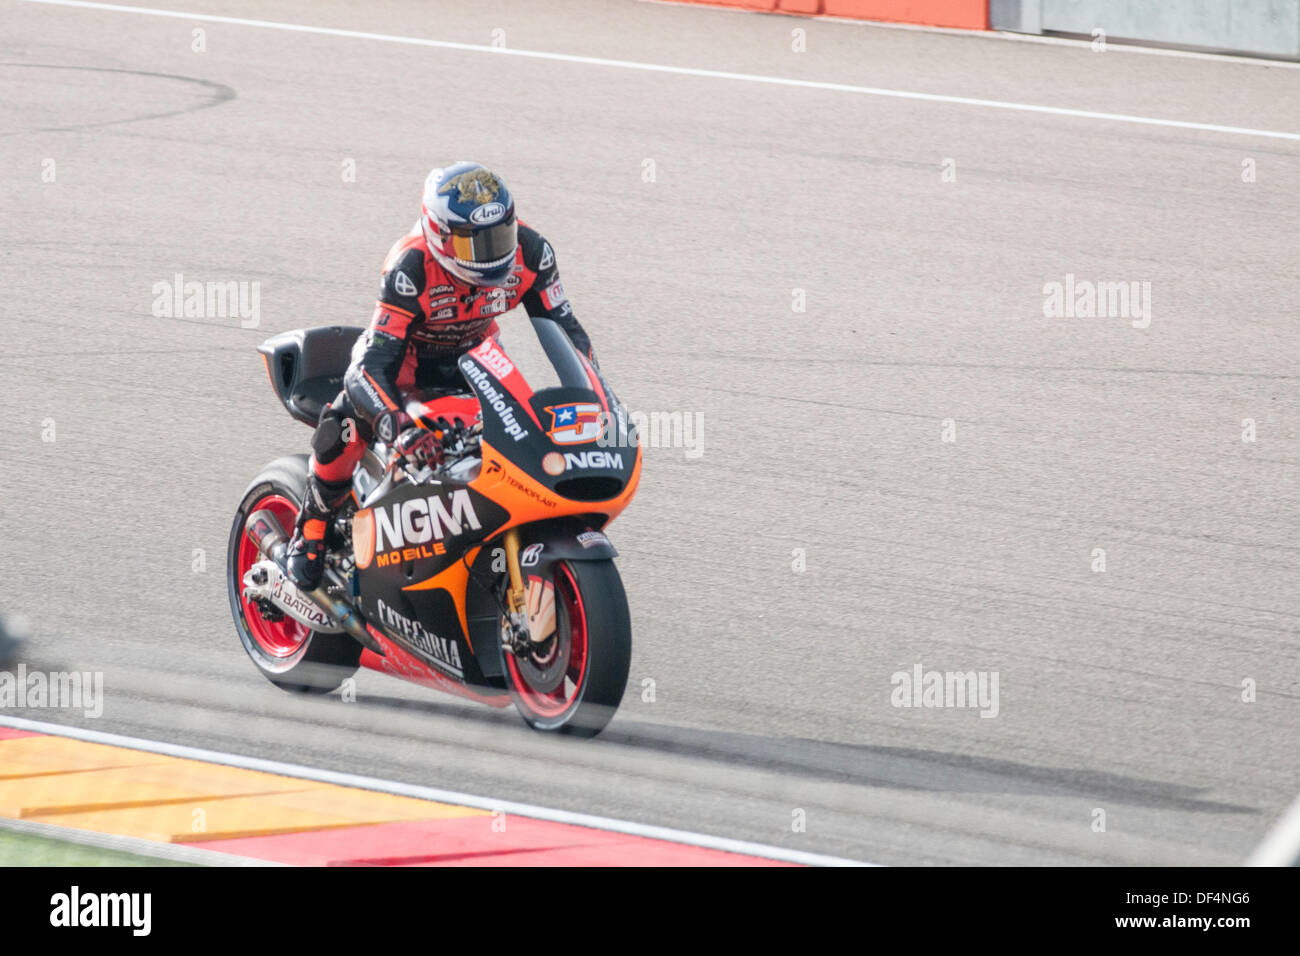 Teruel, Spain. 27th Sep, 2013. American Rider, Colin Edwards, 39, tries to get a good result in free practice1 in Aragon Motogp grand prix, in Alcañiz circuit, Spain on september 27th, 2013 MGM Mobile FTR Kawasaky rider Colin Edwards has finished 17th in fp1 in Alcañiz Circuit, Teruel, Spain. © José Díez Bey/Alamy Live News Stock Photo